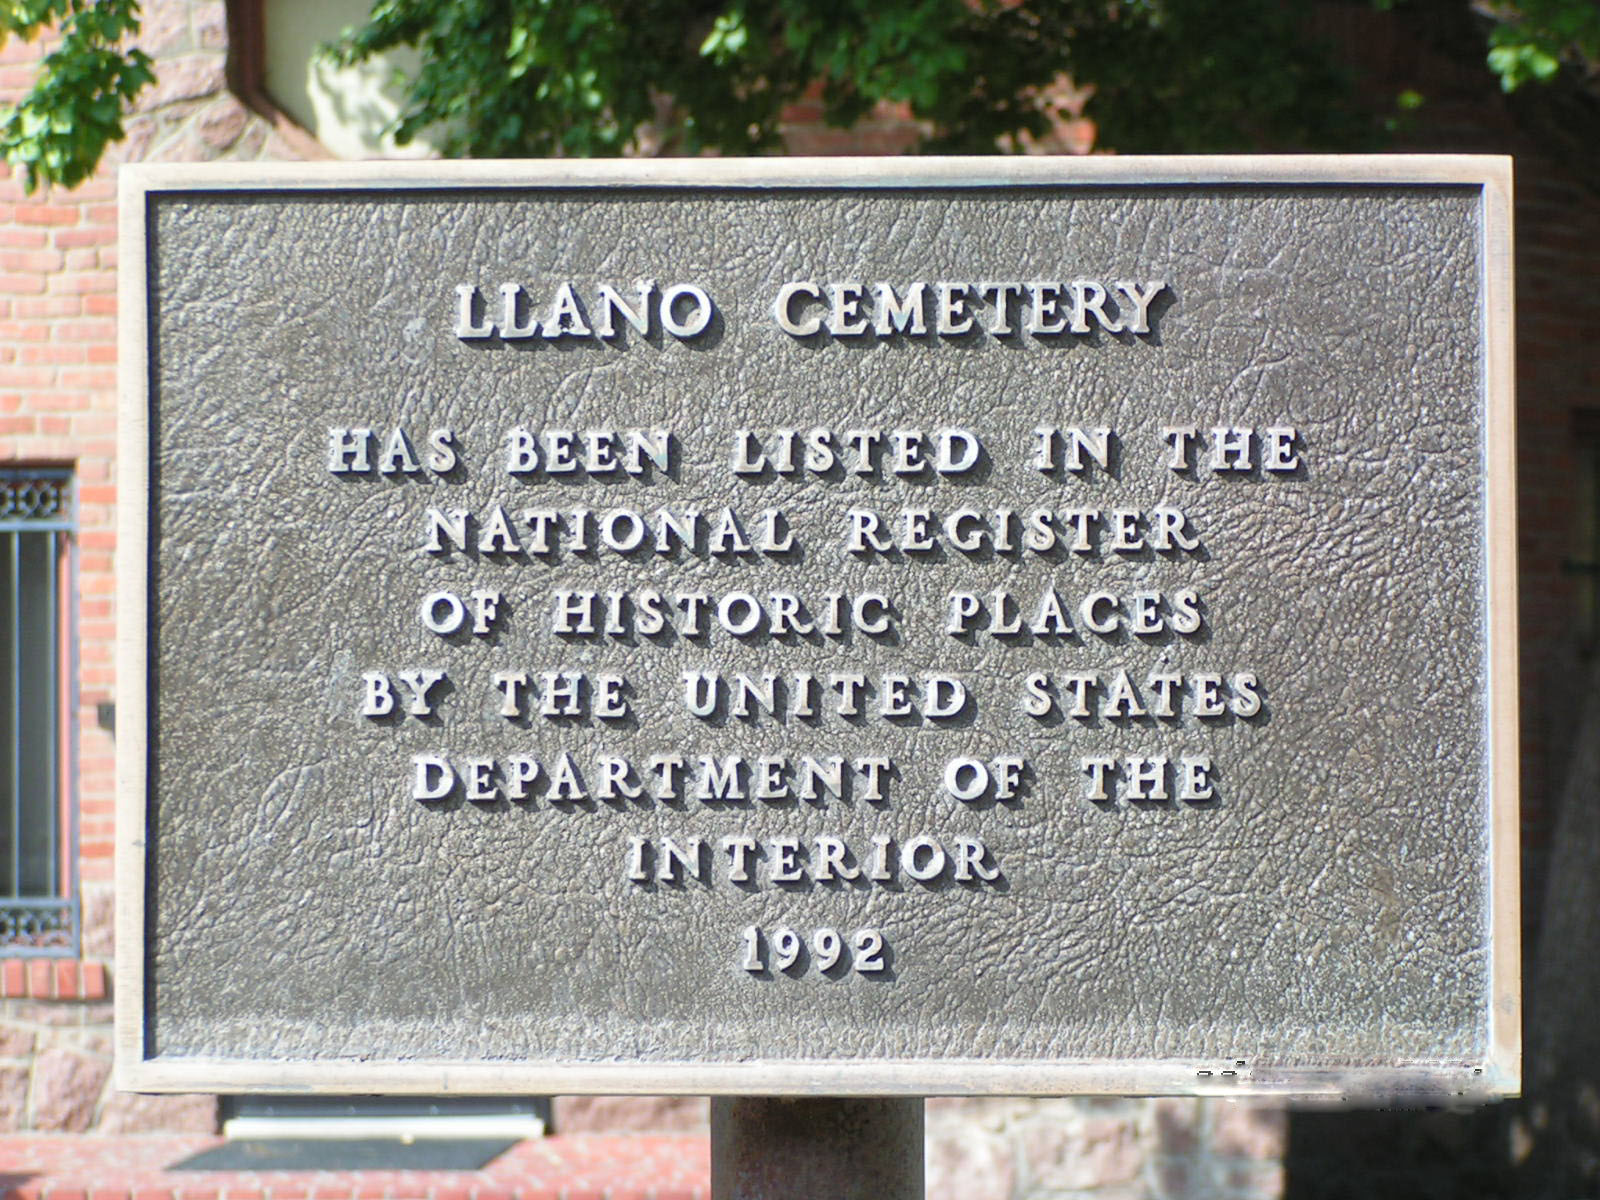 National Register of Historic Places plaque at the Llano Cemetery.